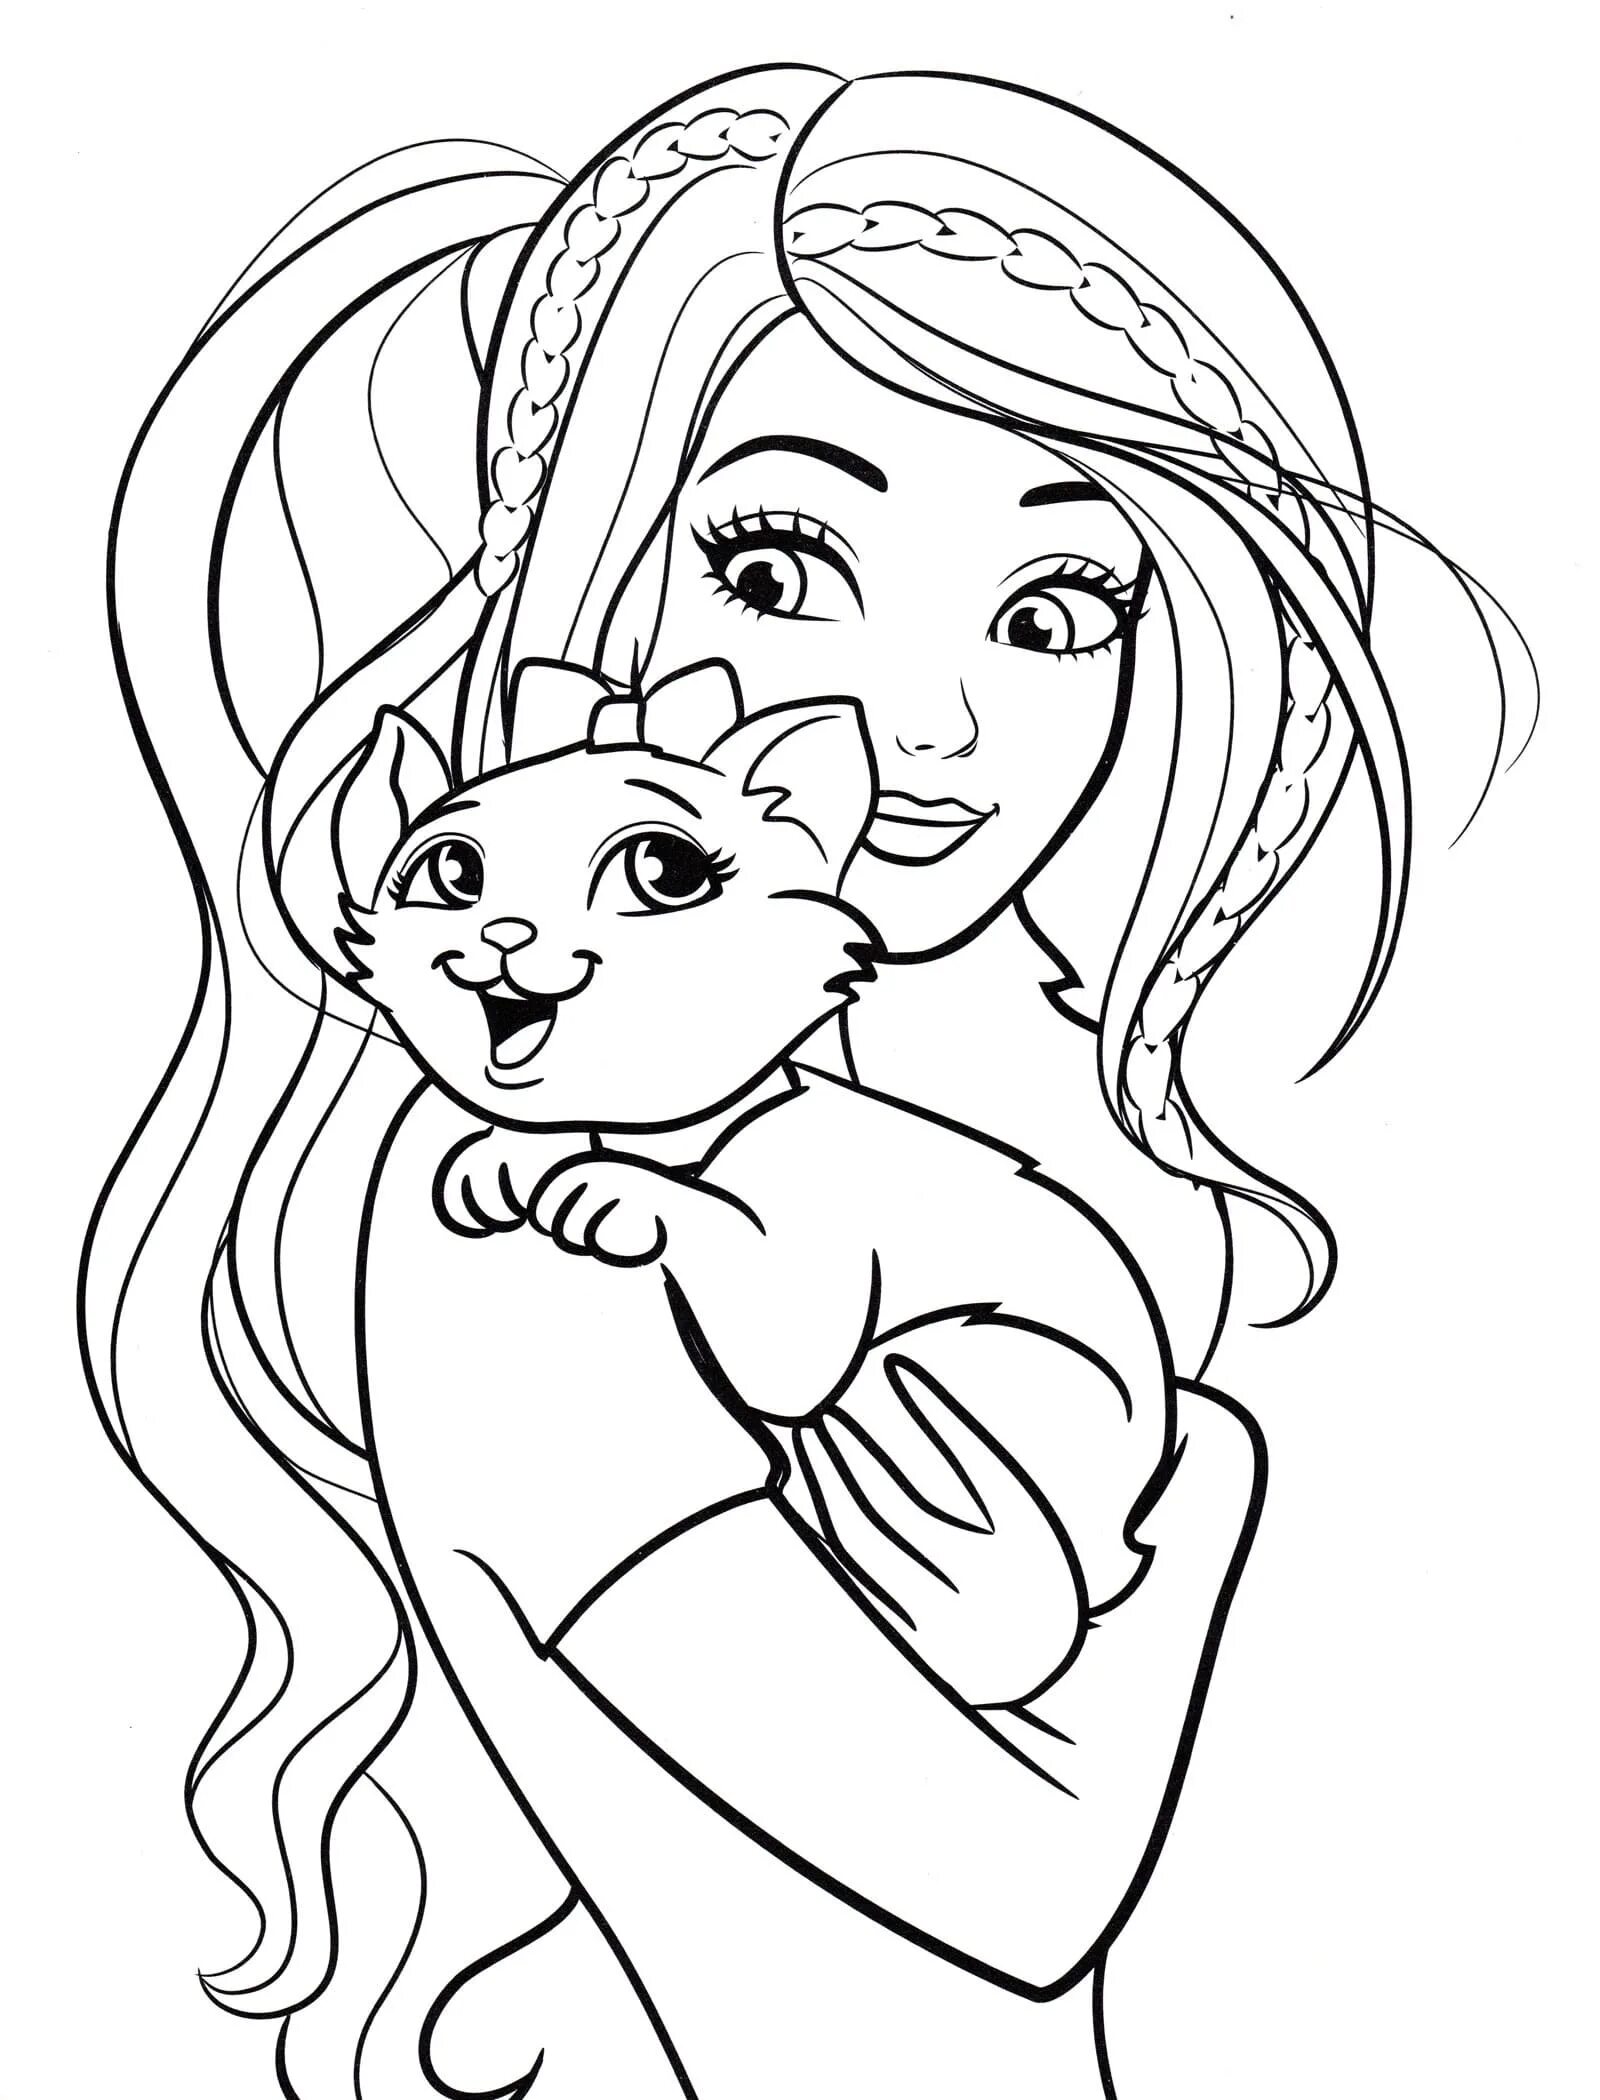 Color-frenzy coloring pages for girls all